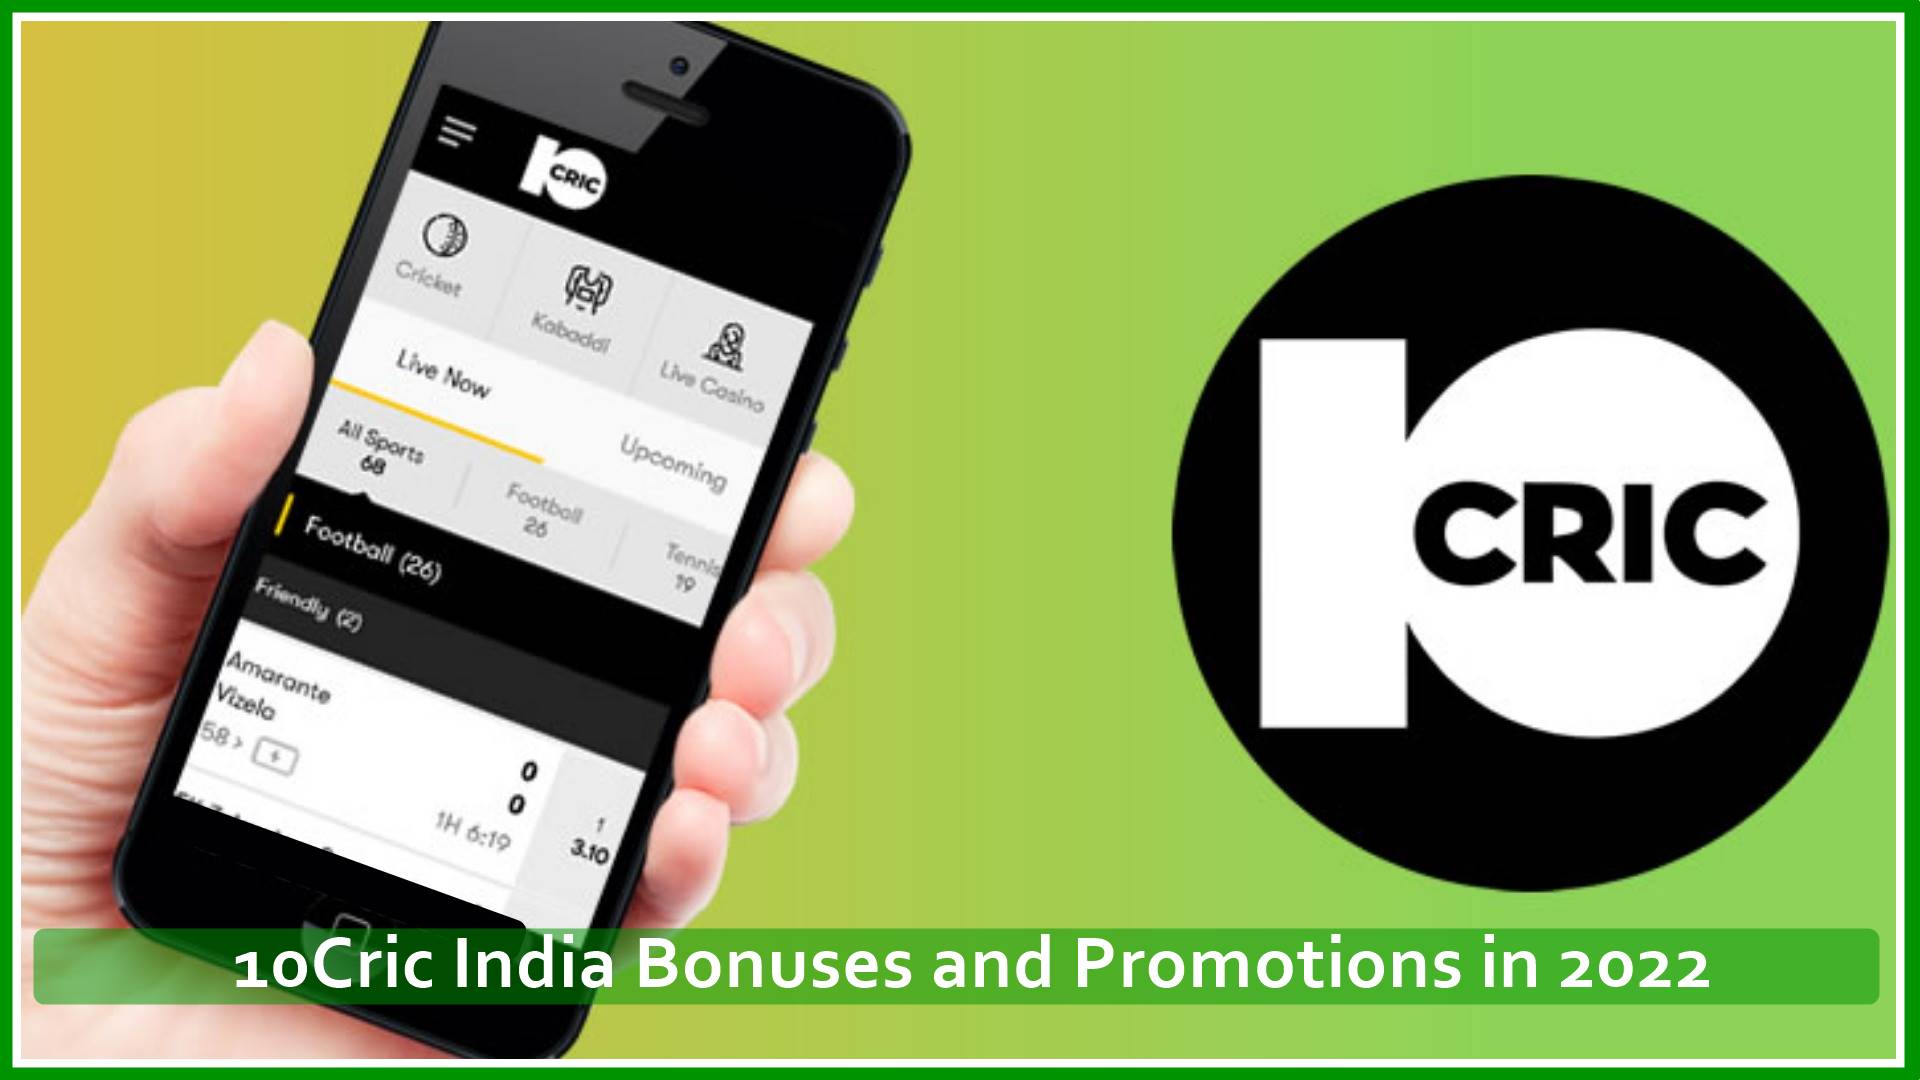 10Сric India Bonuses and Promotions in 2022